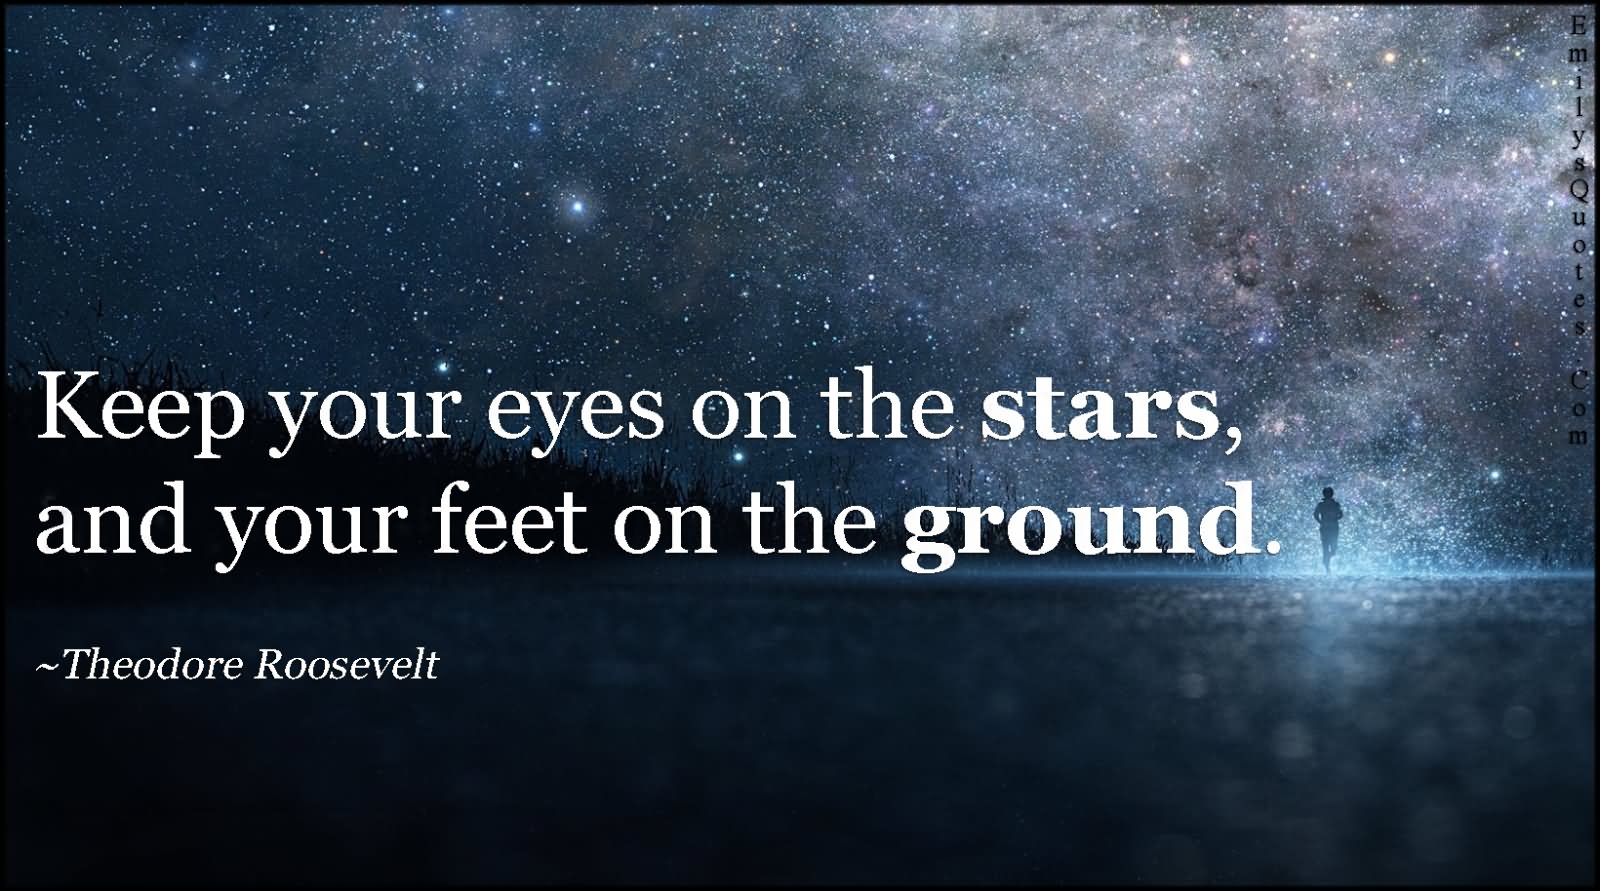 Keep your eyes on the stars,and your feet on the ground.